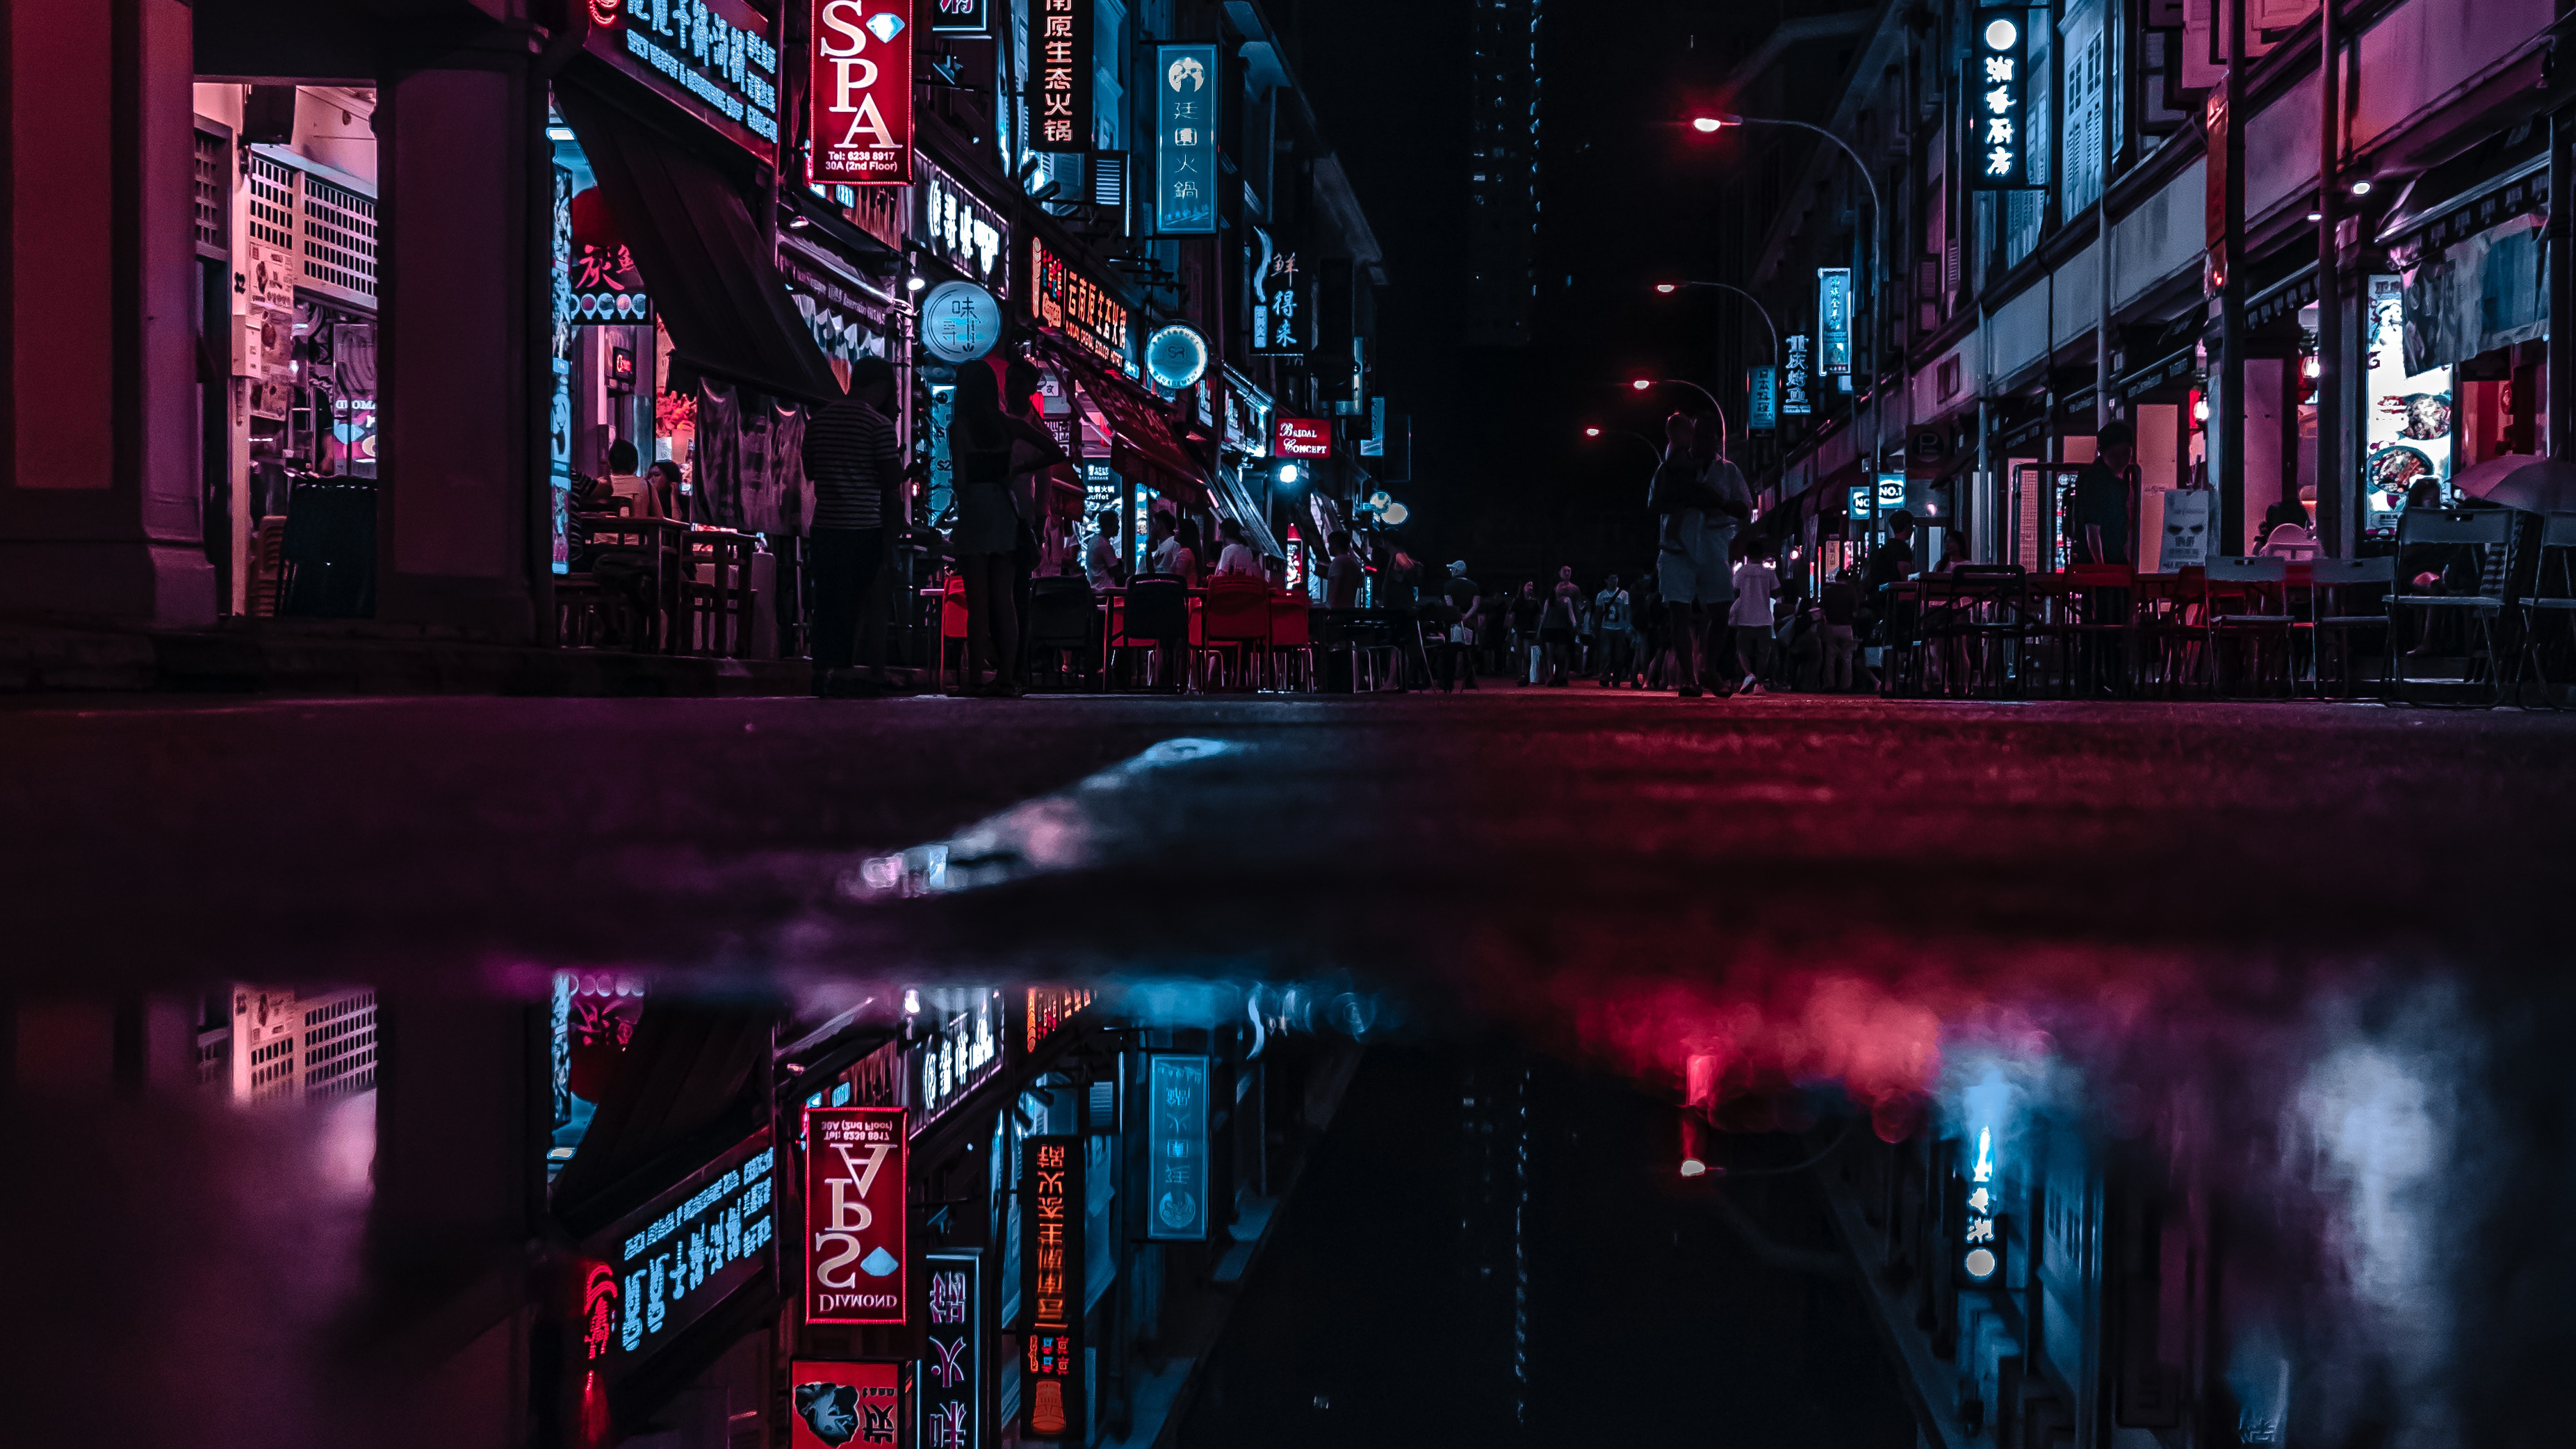 Asia Neon City Lights Reflections Hd Photography 4k Wallpapers